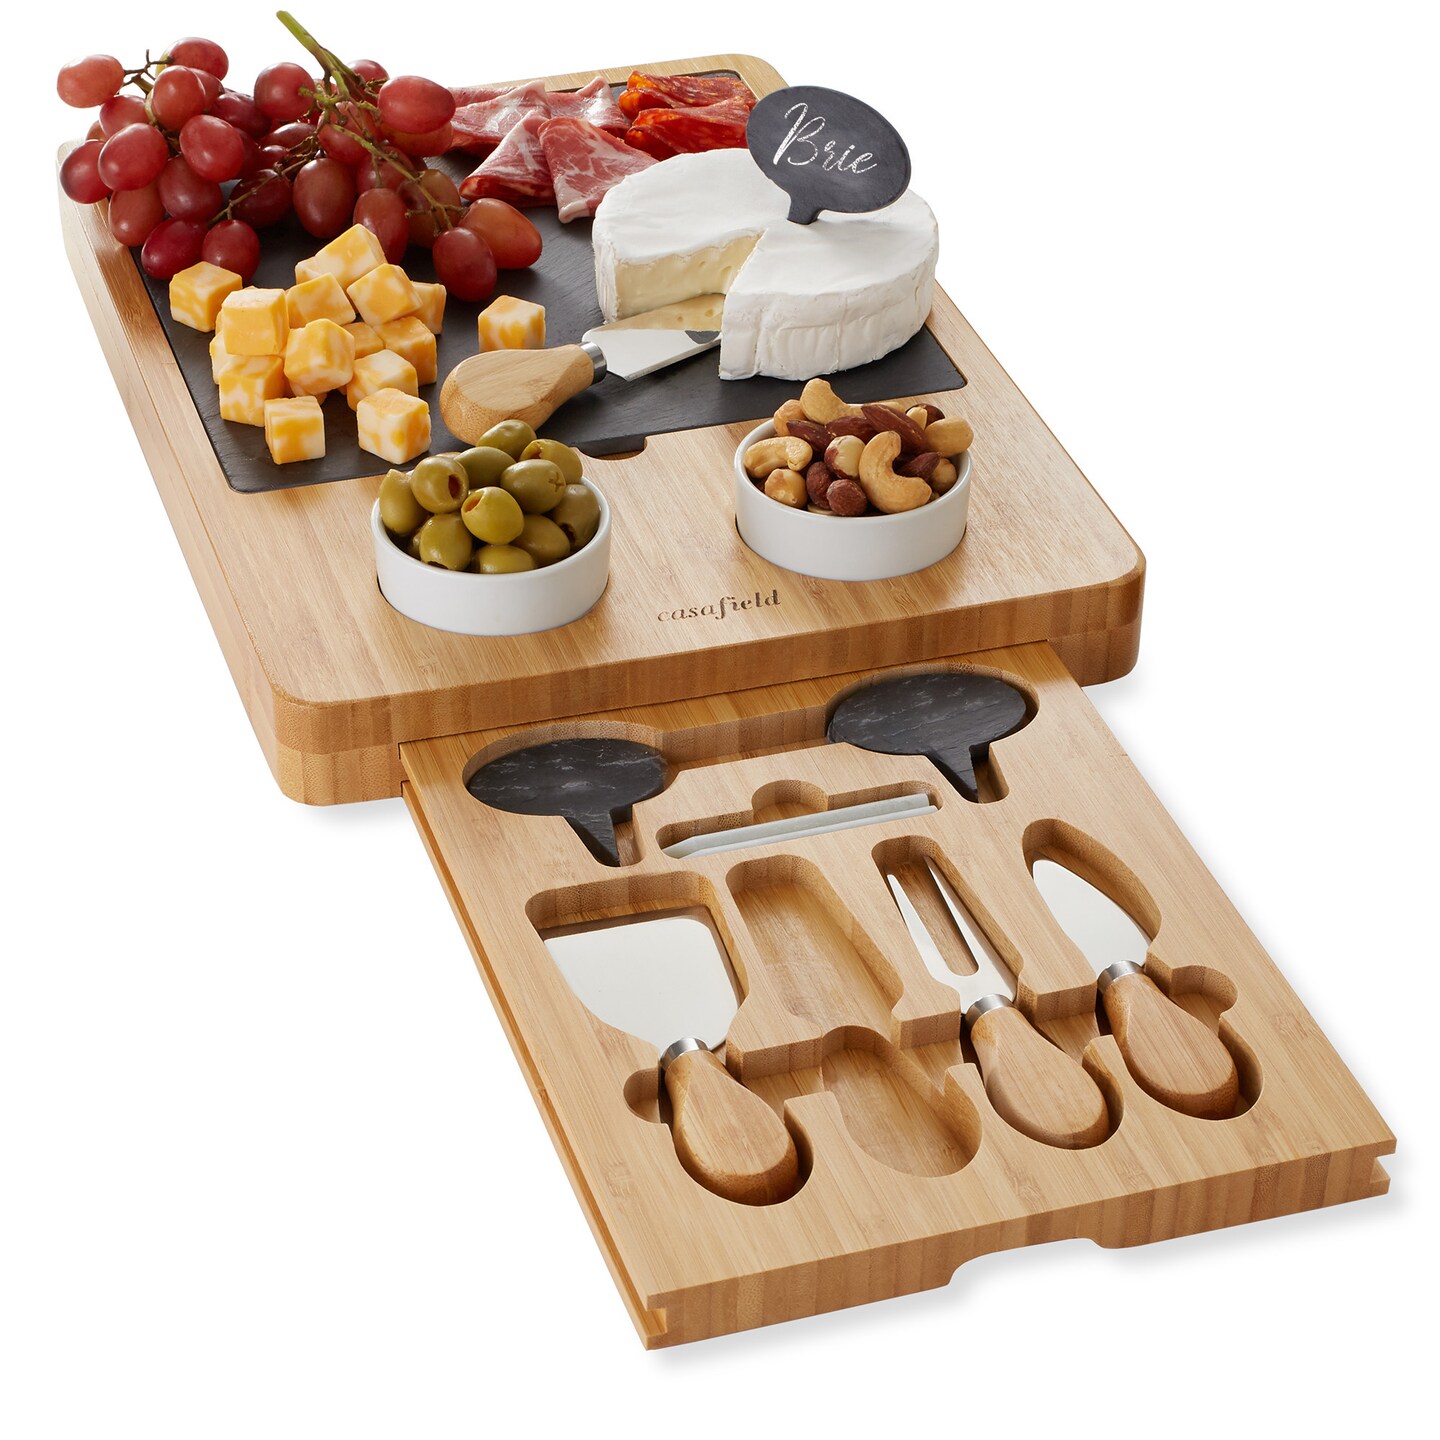 Casafield Charcuterie Board, Large Bamboo Cheese Board and Cutlery Set with Slate Cheese Plate, Ceramic Bowls, Cheese Knives, Labels, and Chalk